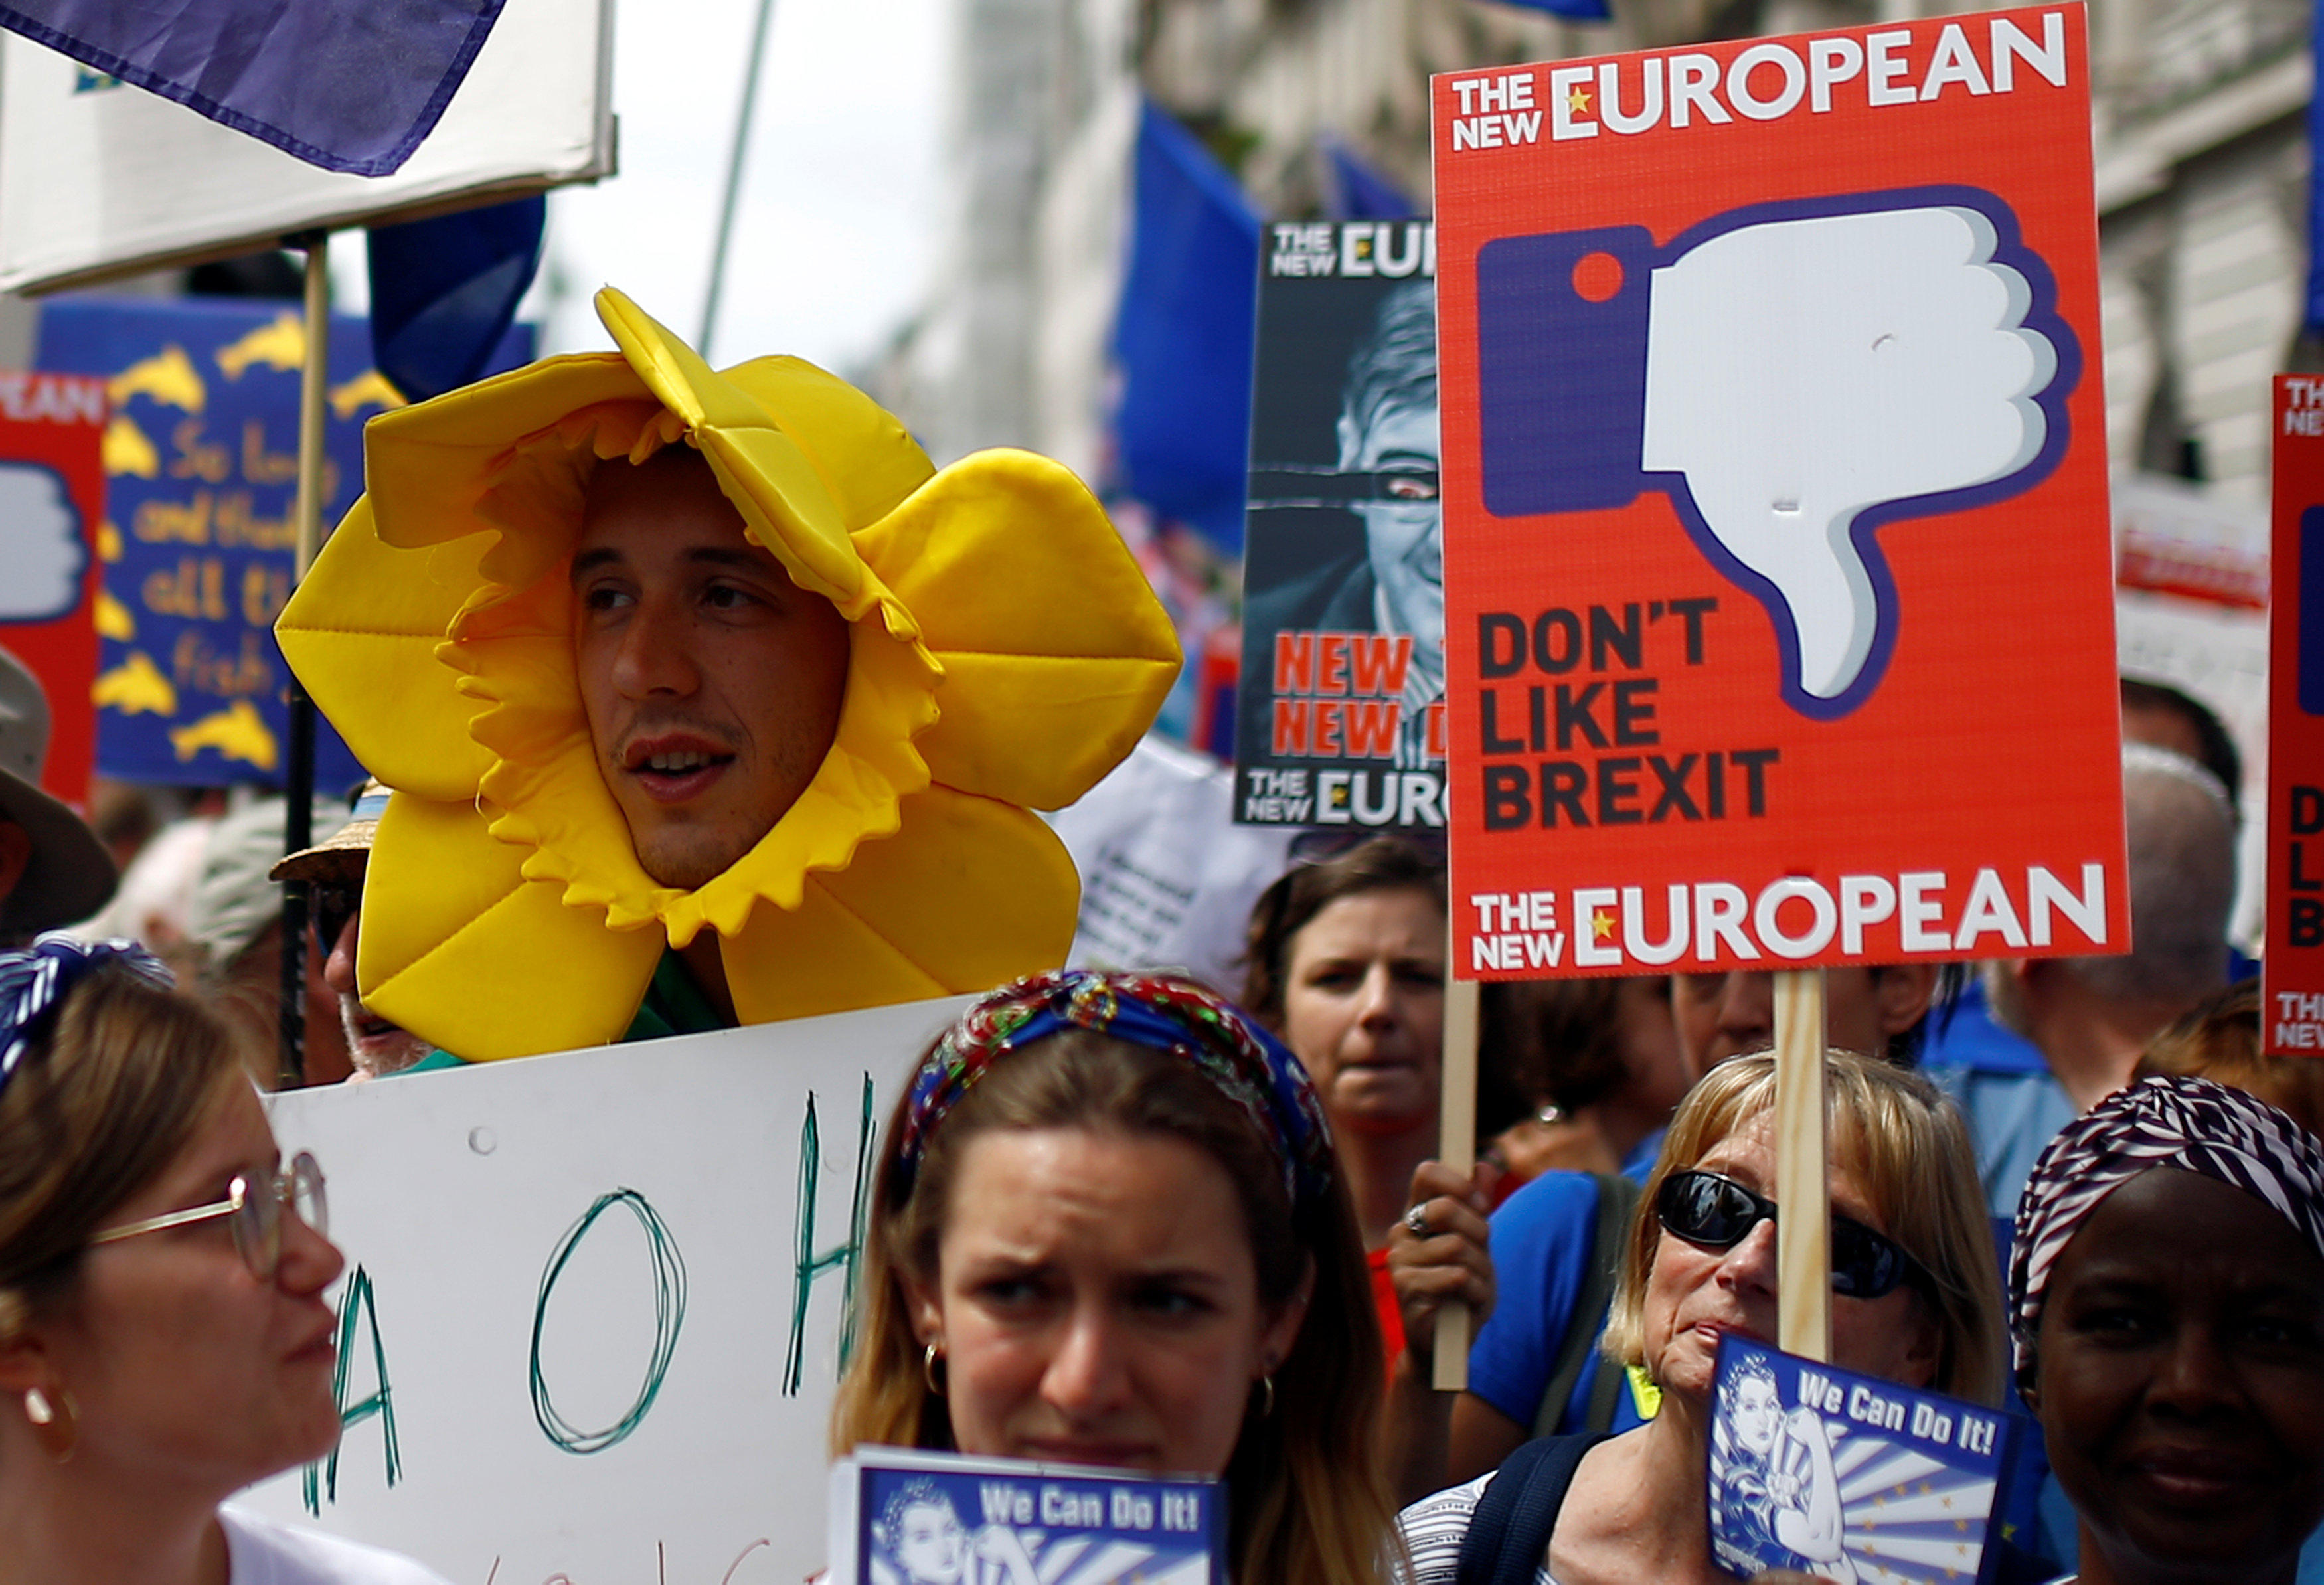 Tens of thousands anti-Brexit protesters march in London, demand new vote - CBS News3500 x 2387